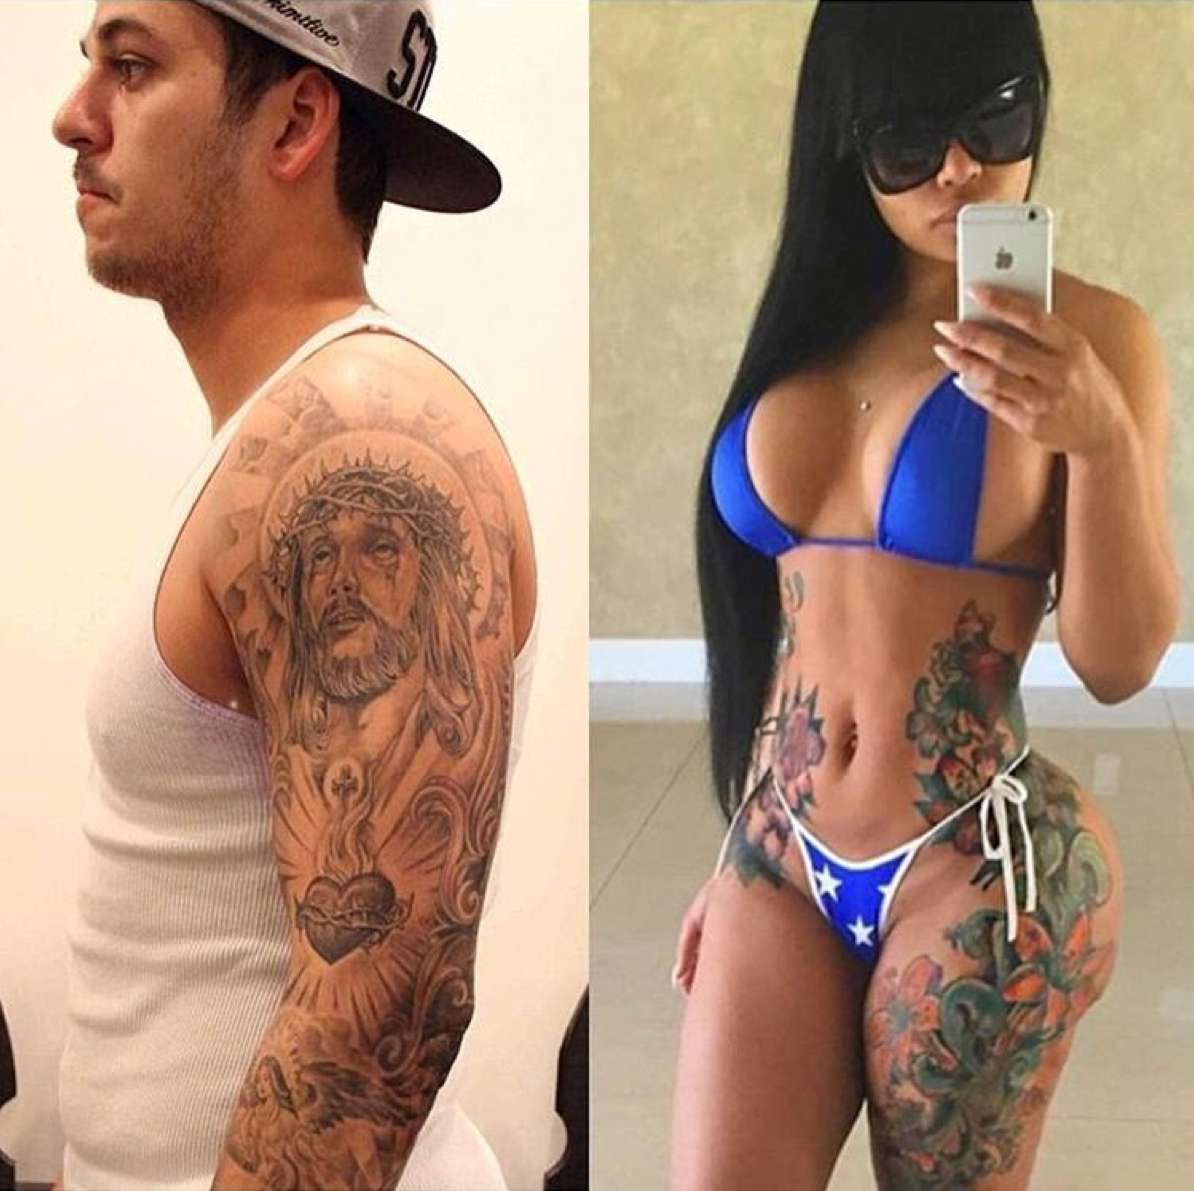 chris hustead recommends Black Chyna Naked Photos